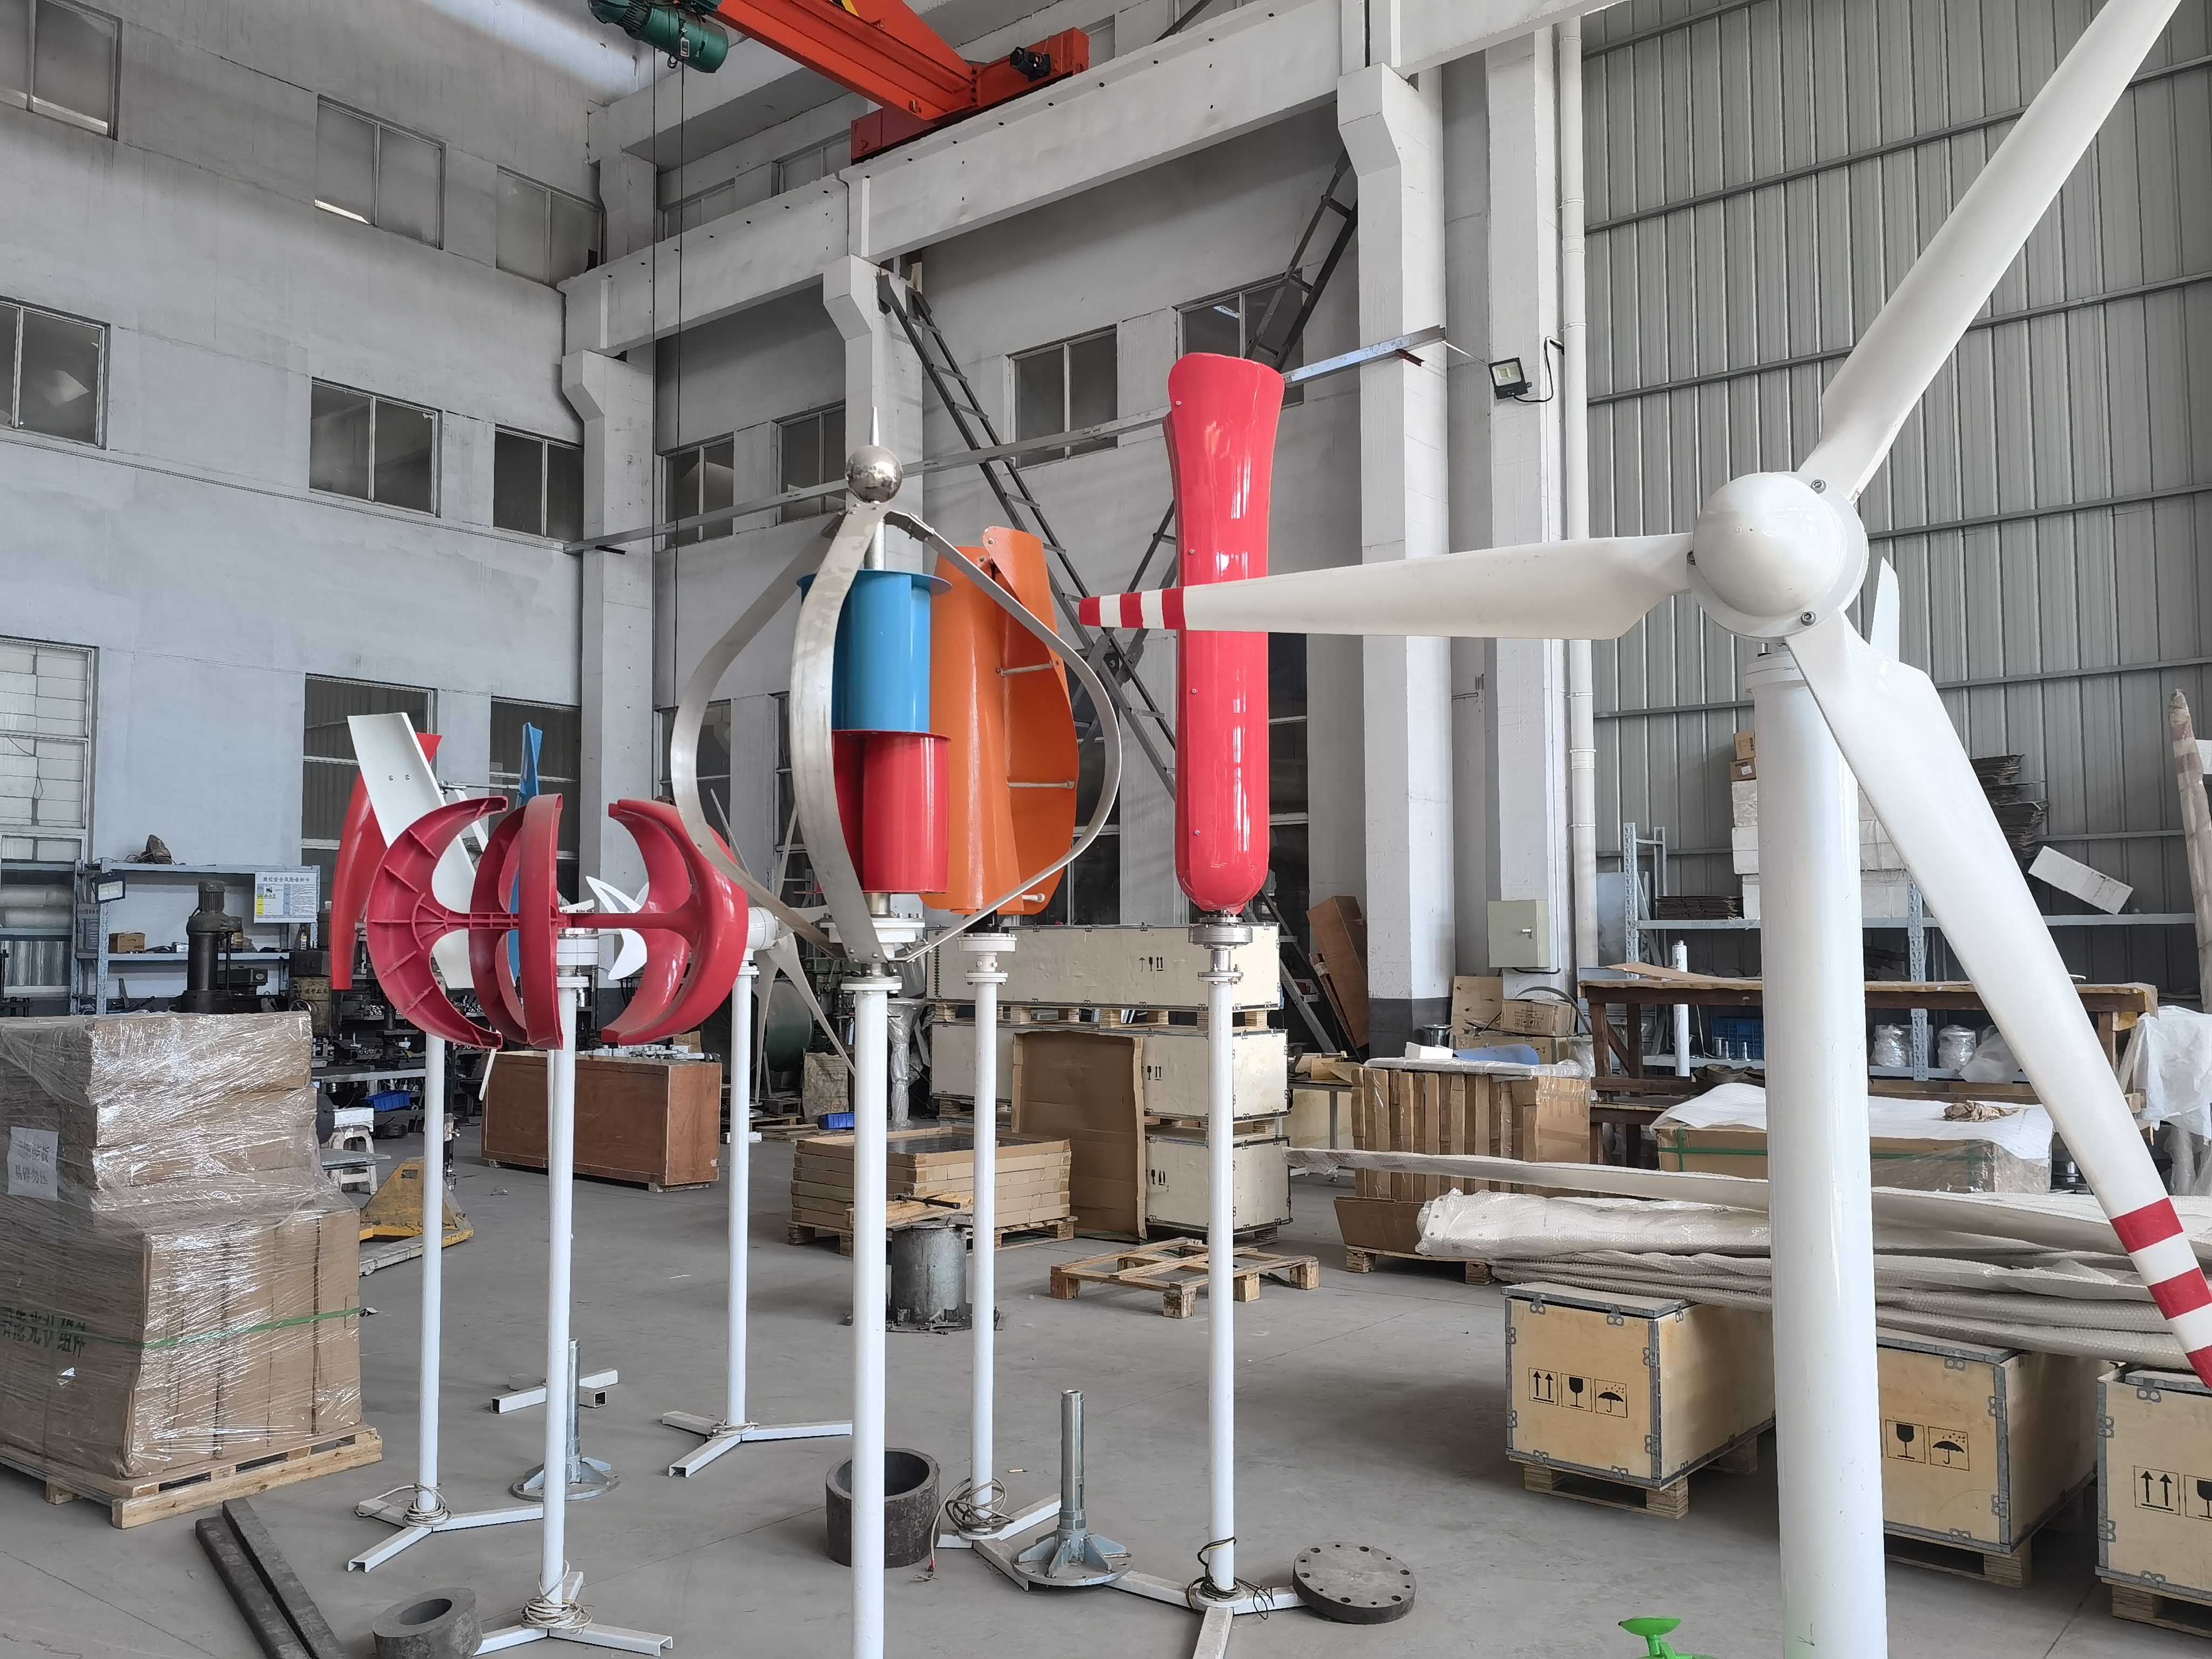 WHAT ARE THE MAIN COMPONENTS OF A WIND TURBINE